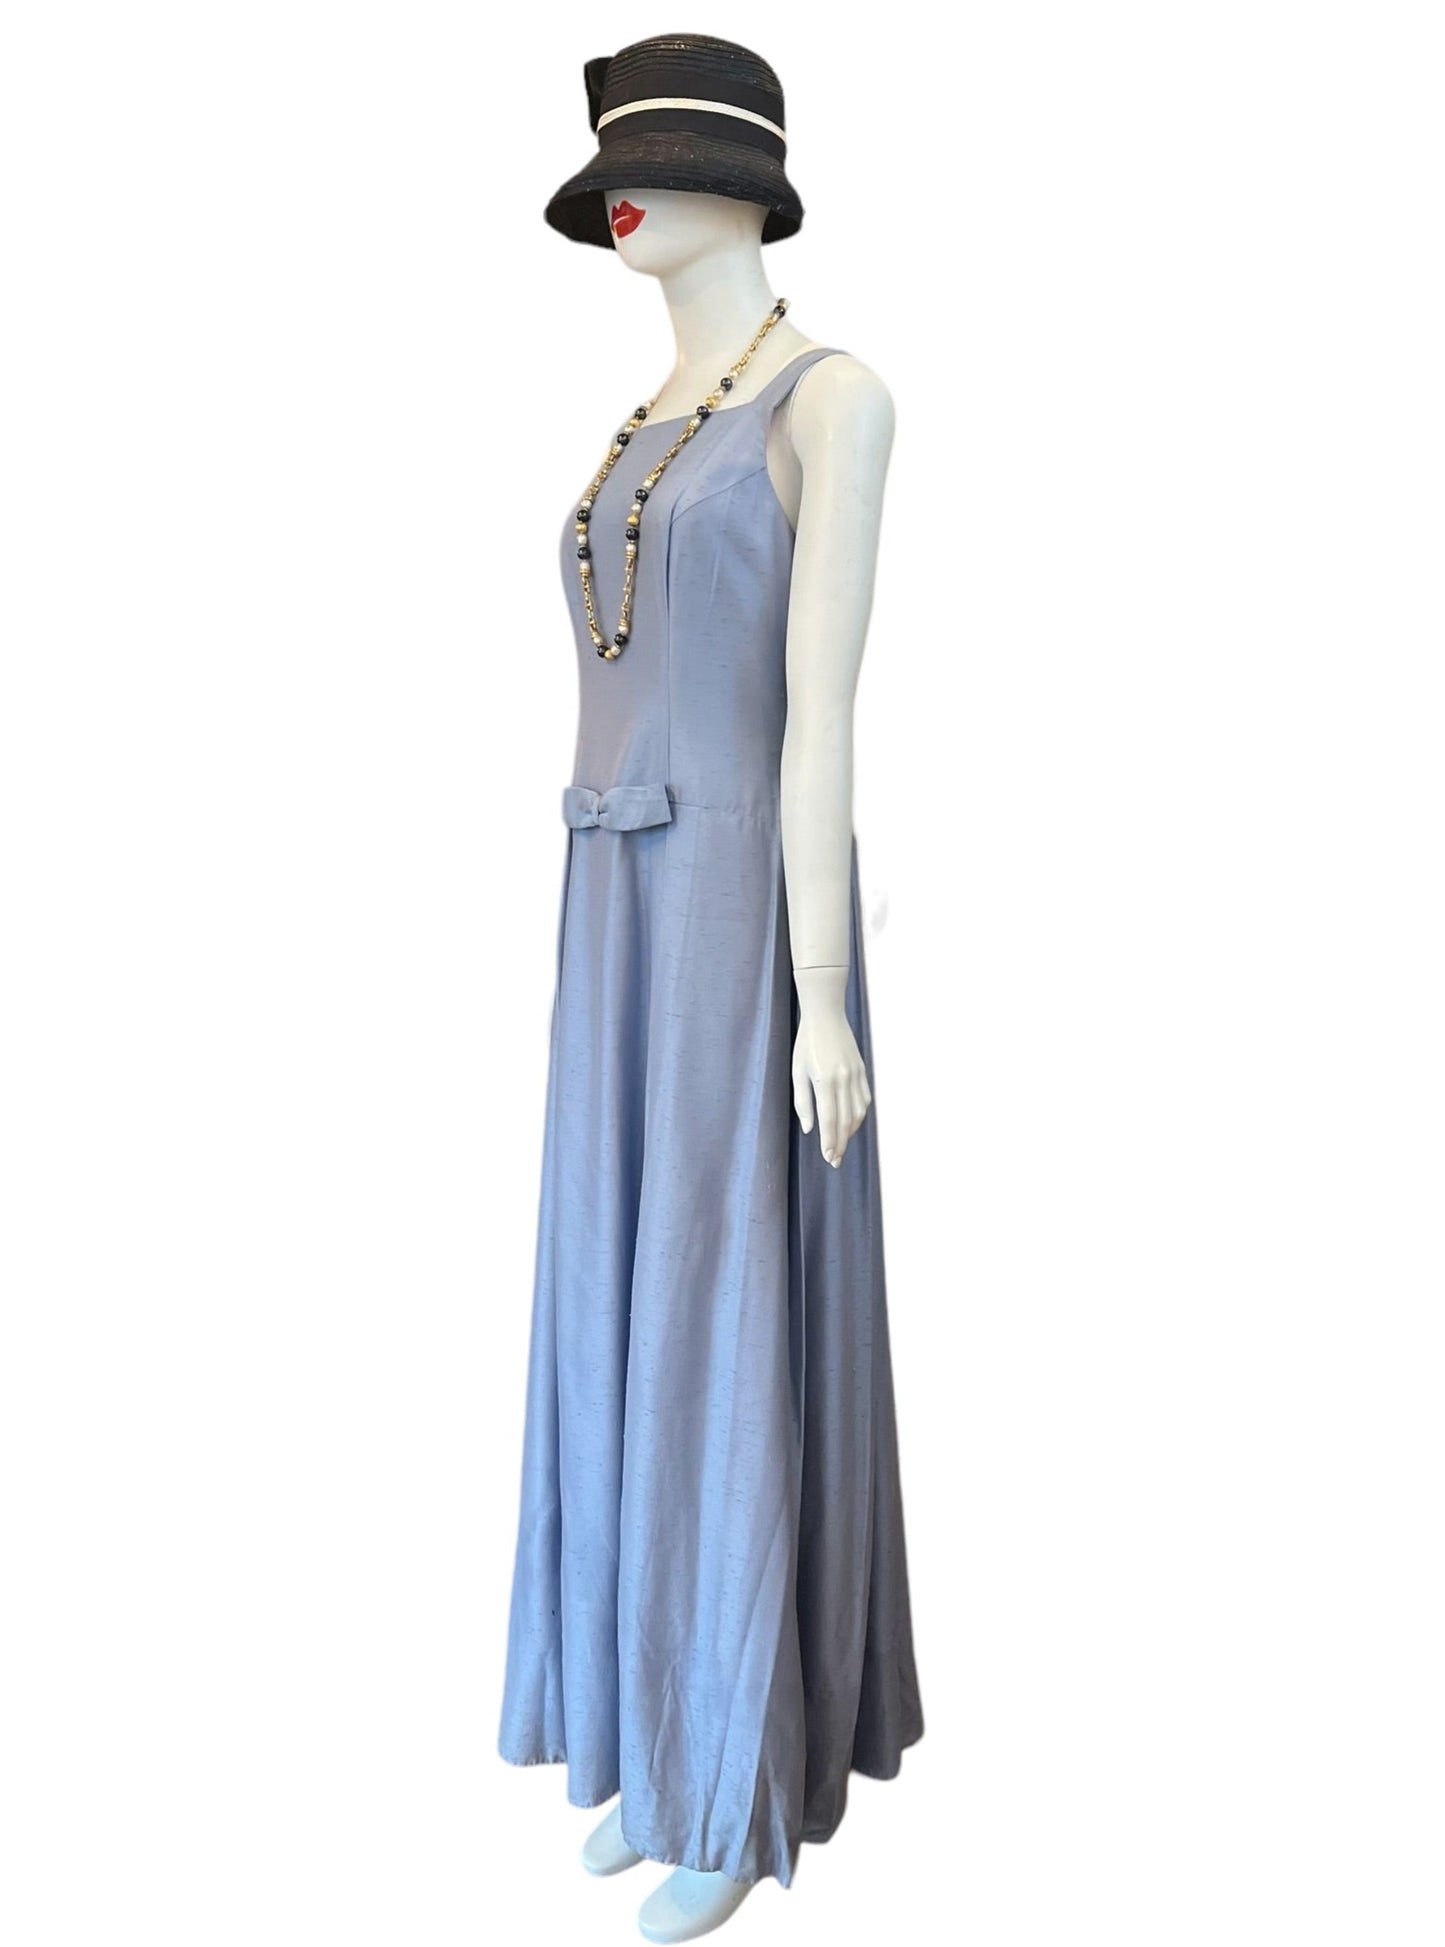 Periwinkle Long Dress with a Bow: Drop waist vintage evening dress or gown sleeveless